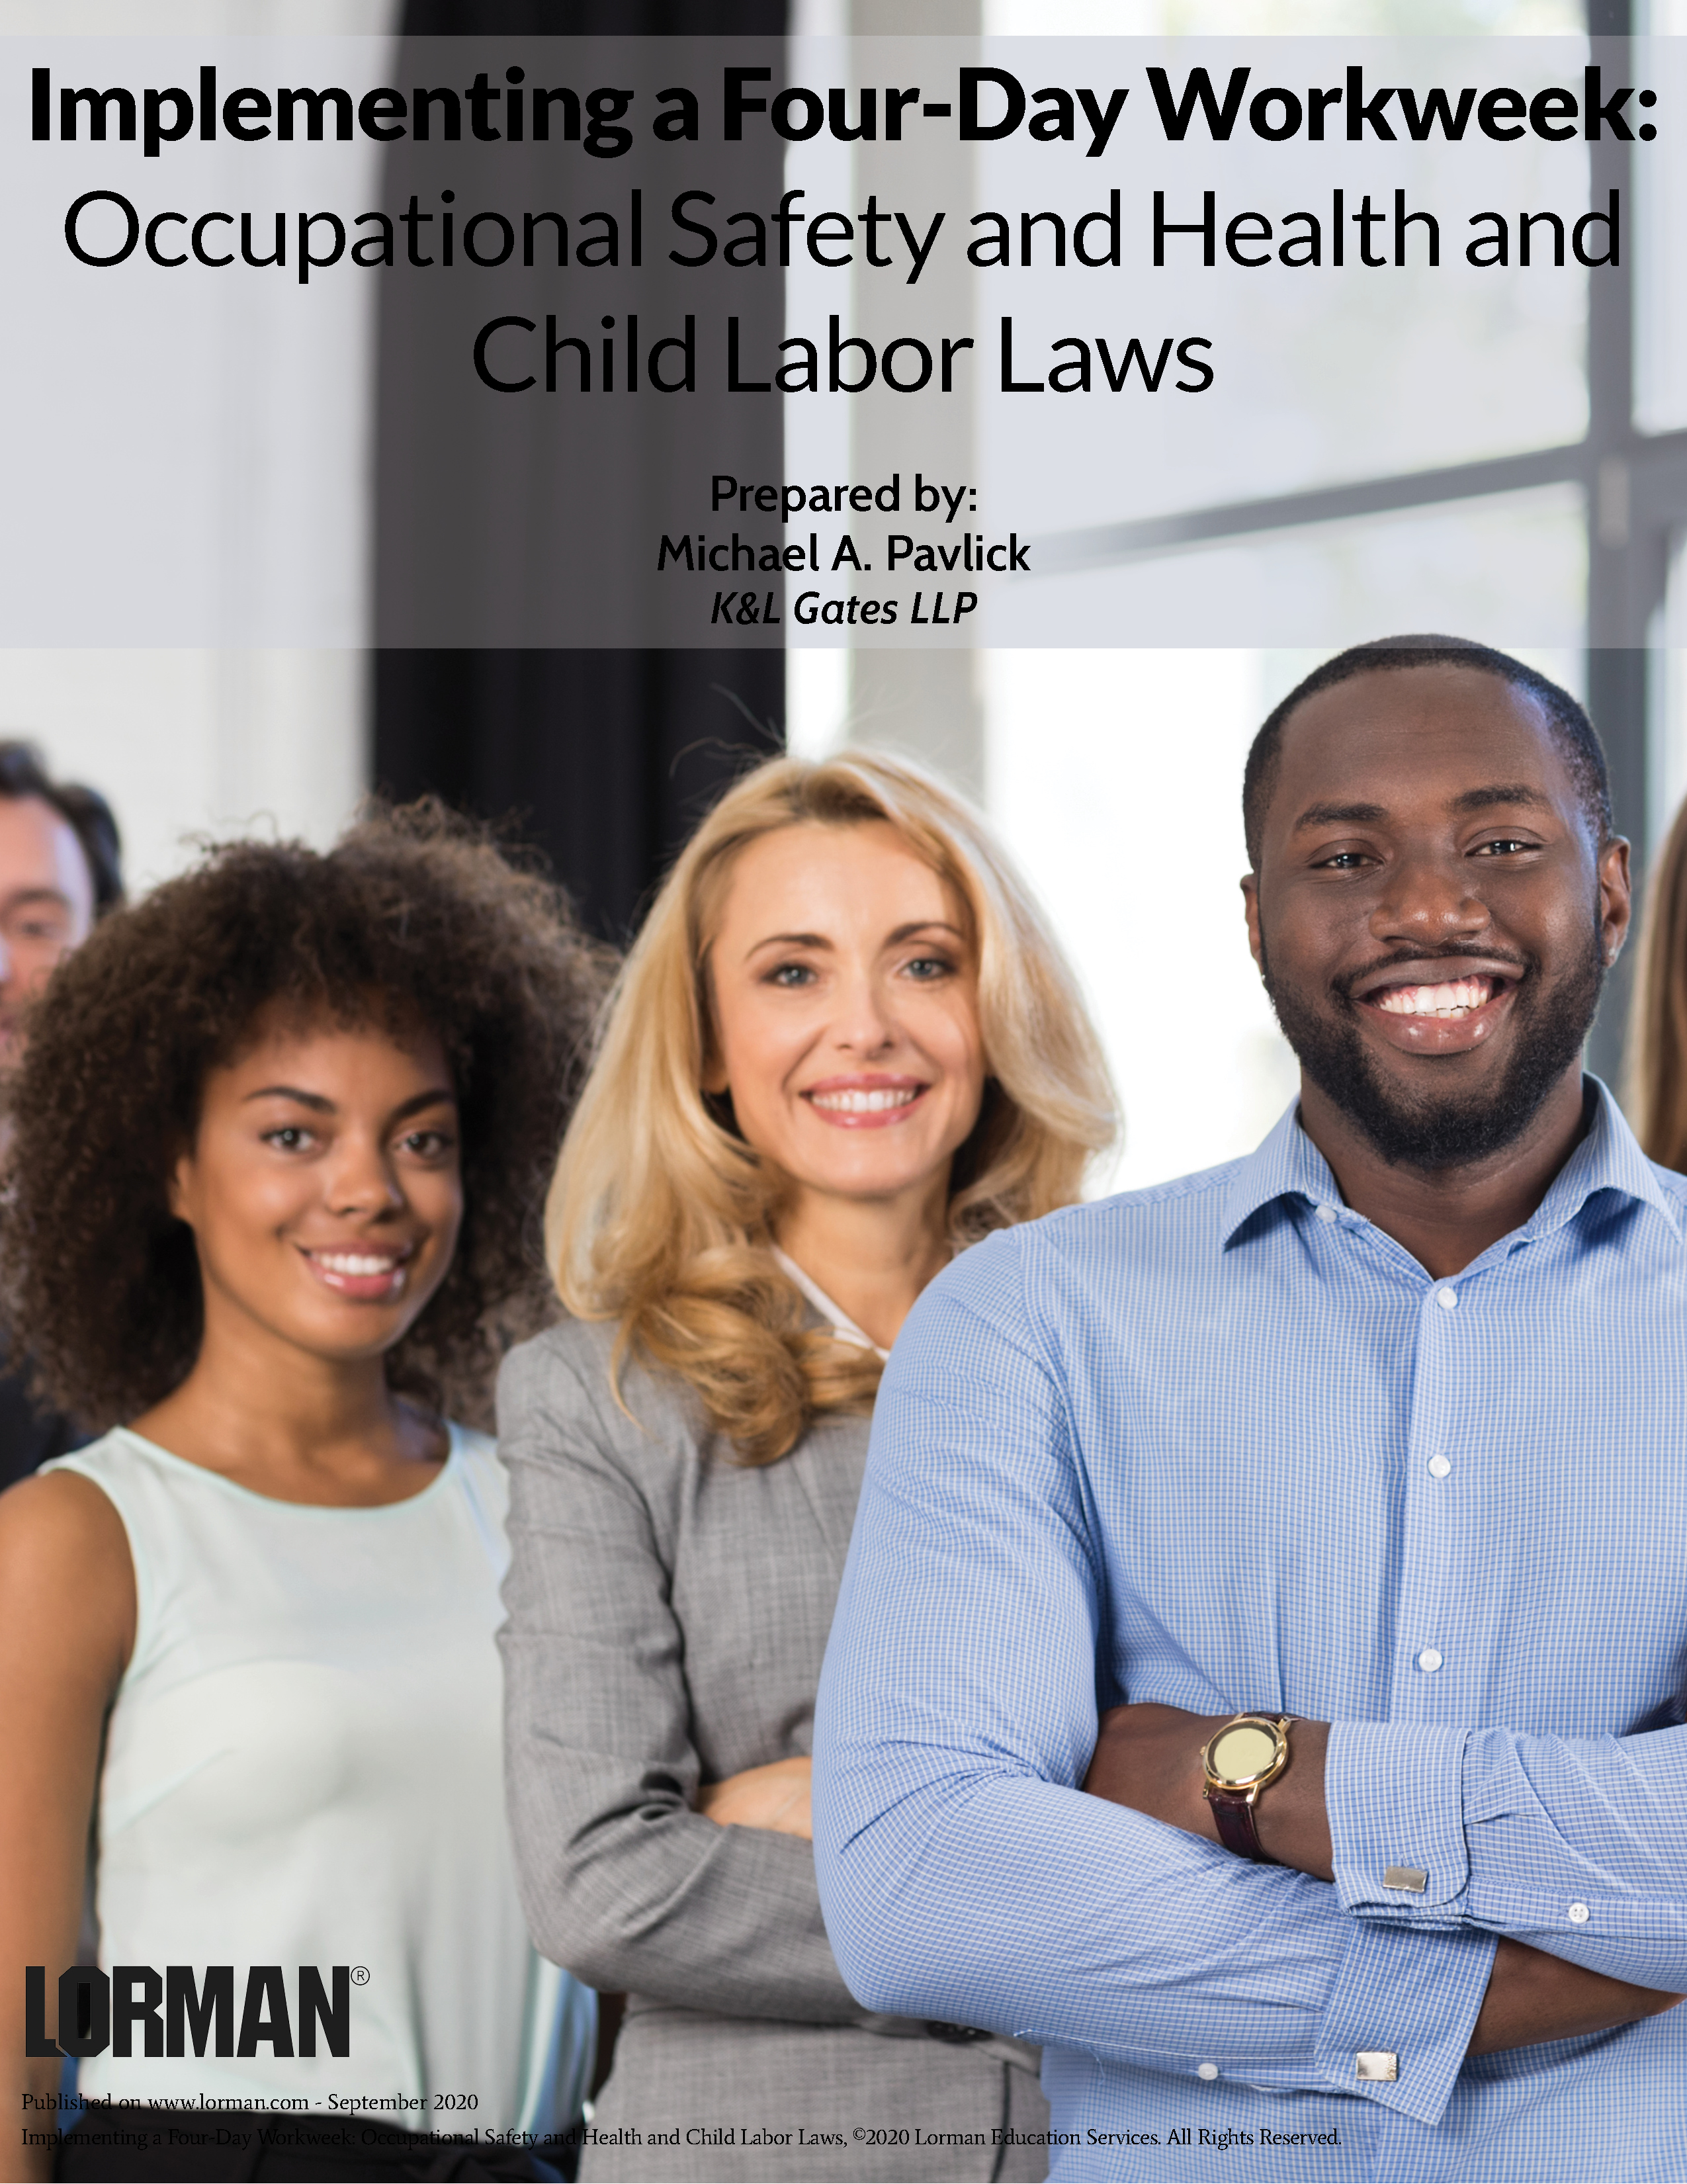 Implementing a Four-Day Workweek: Occupational Safety and Health and Child Labor Laws